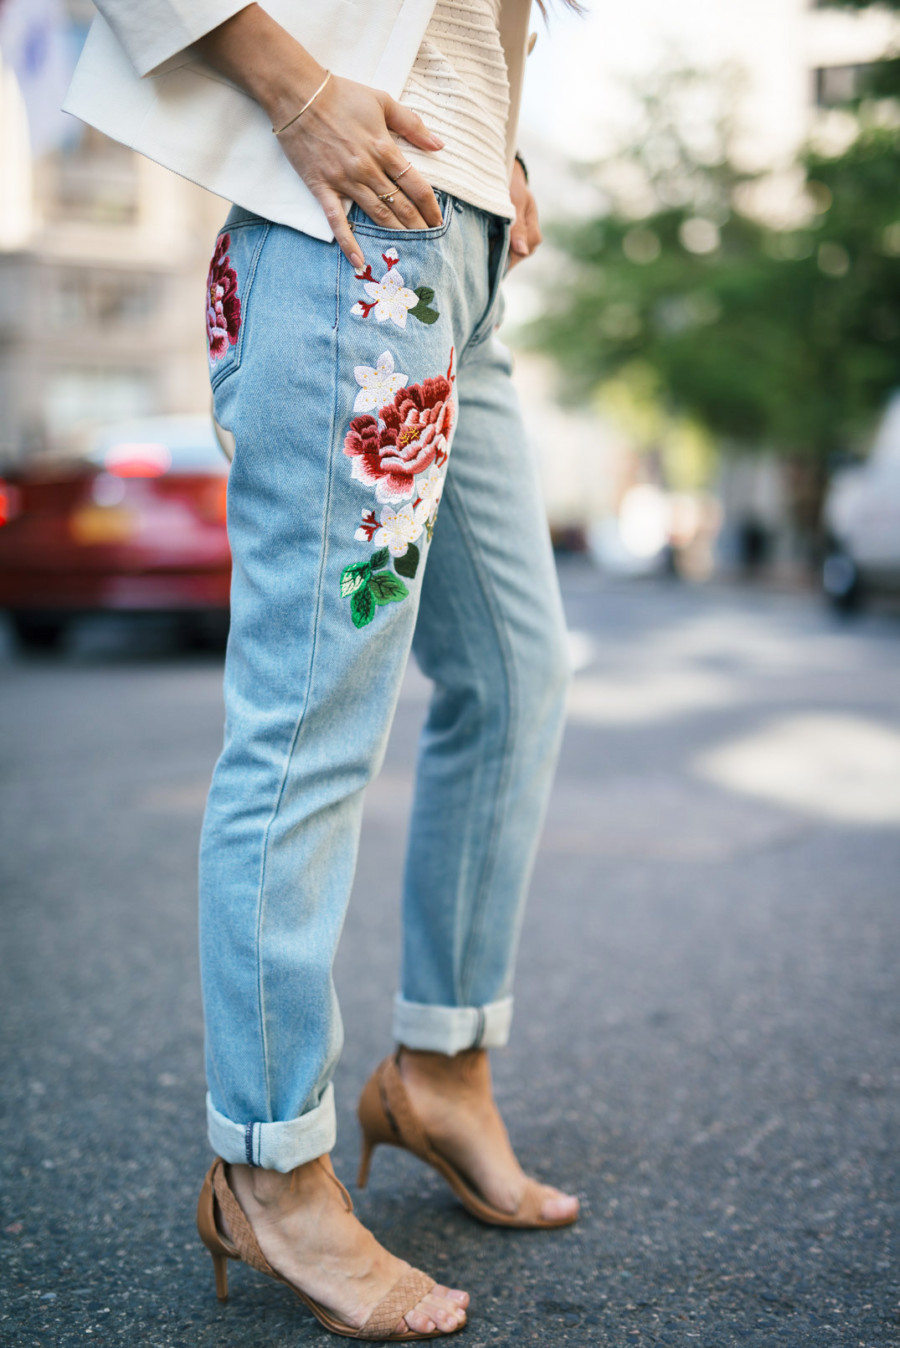 Floral-Embroidered-Jeans-NotJessFashion-450x674@2x